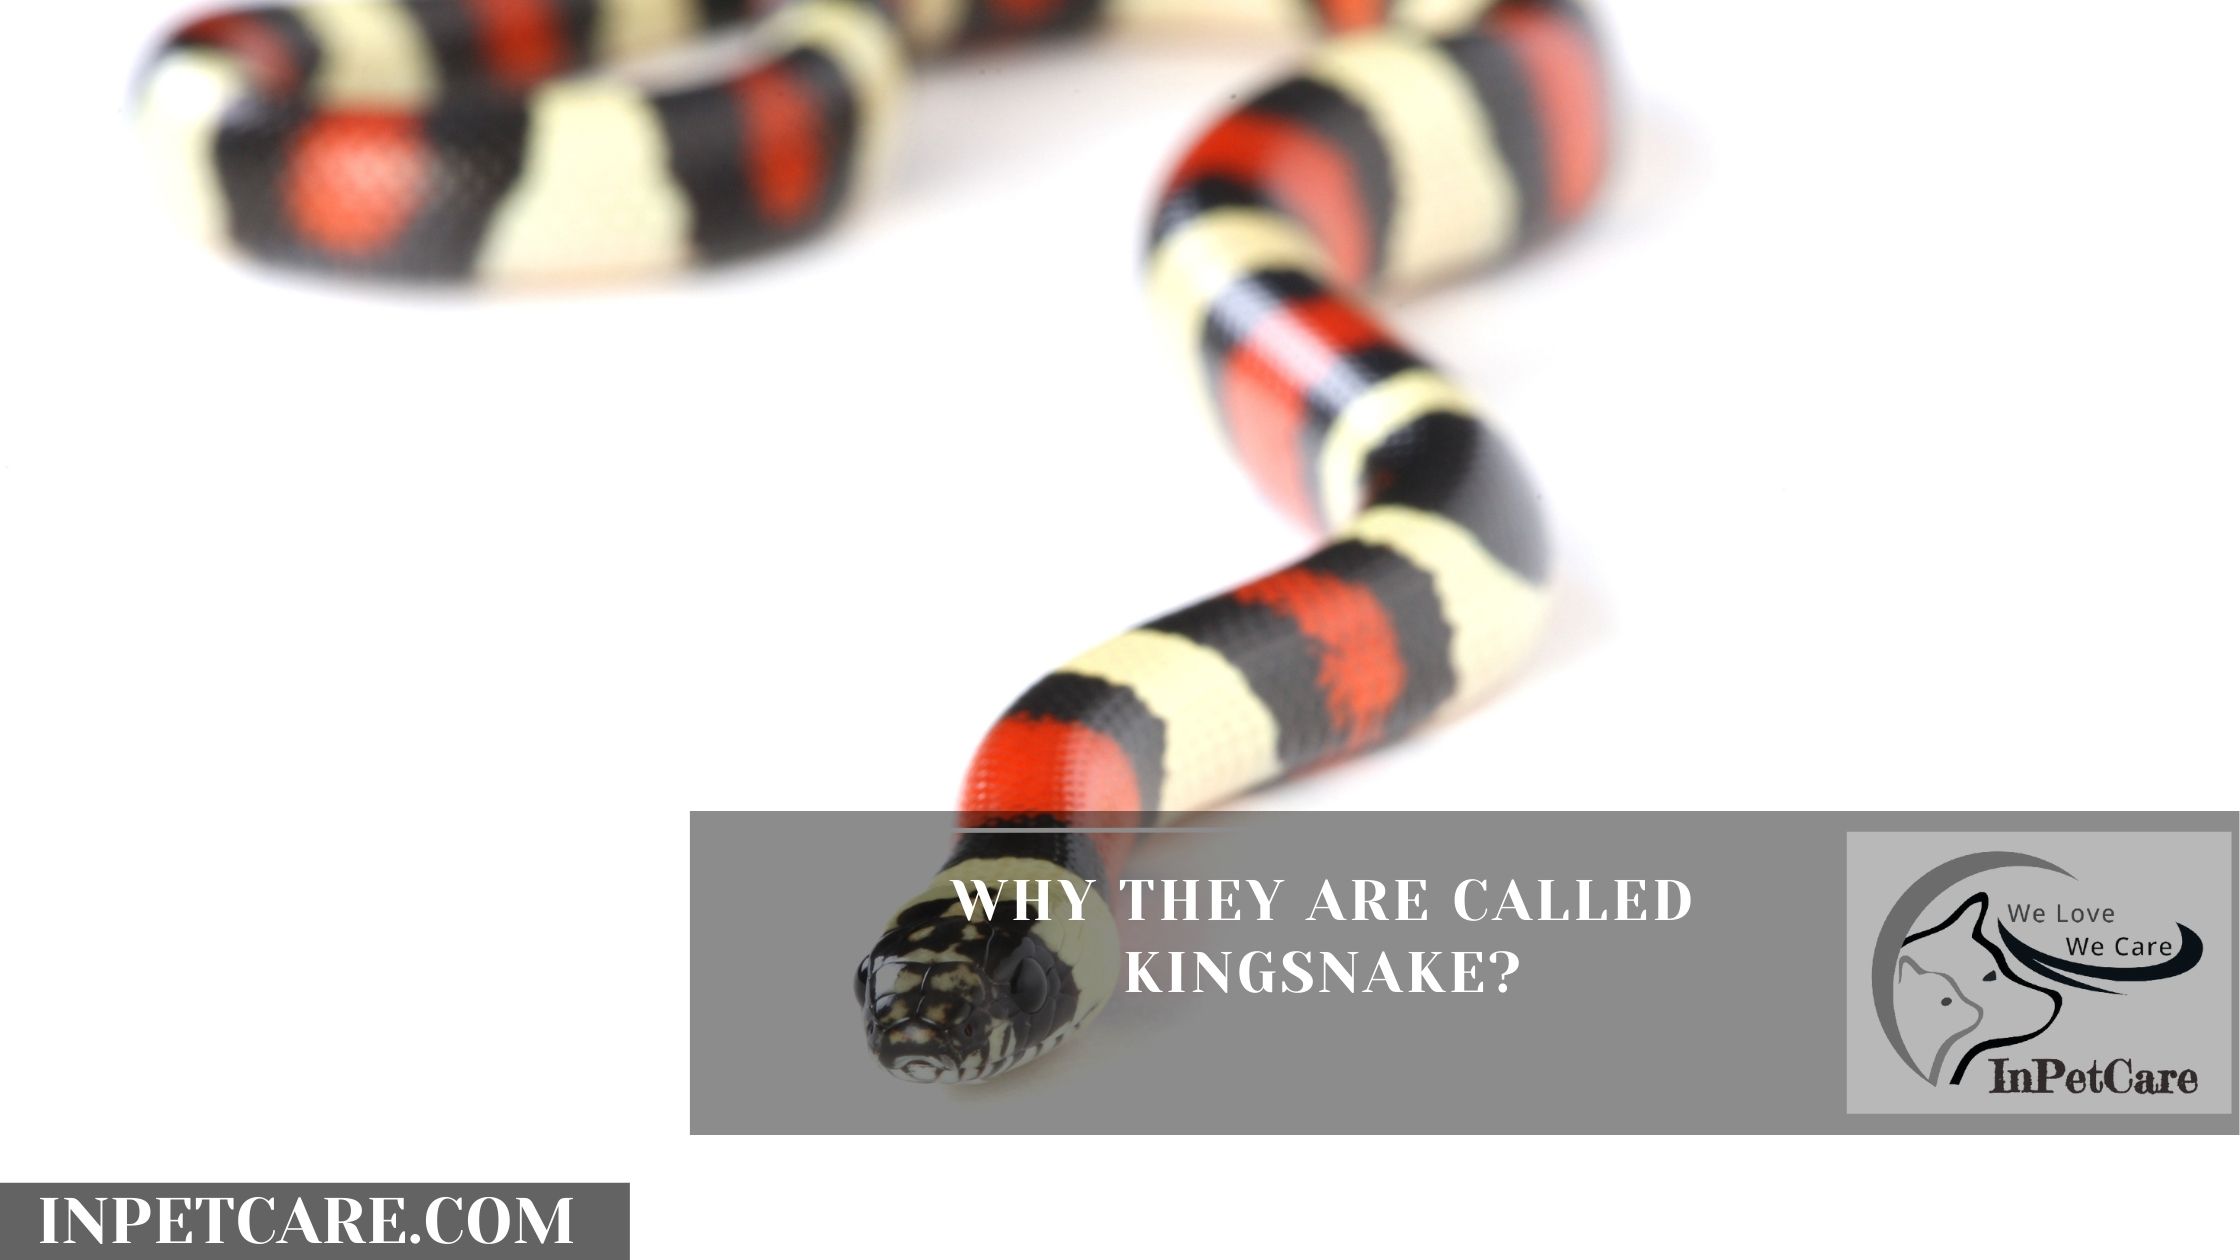 Why They Are Called Kingsnake?